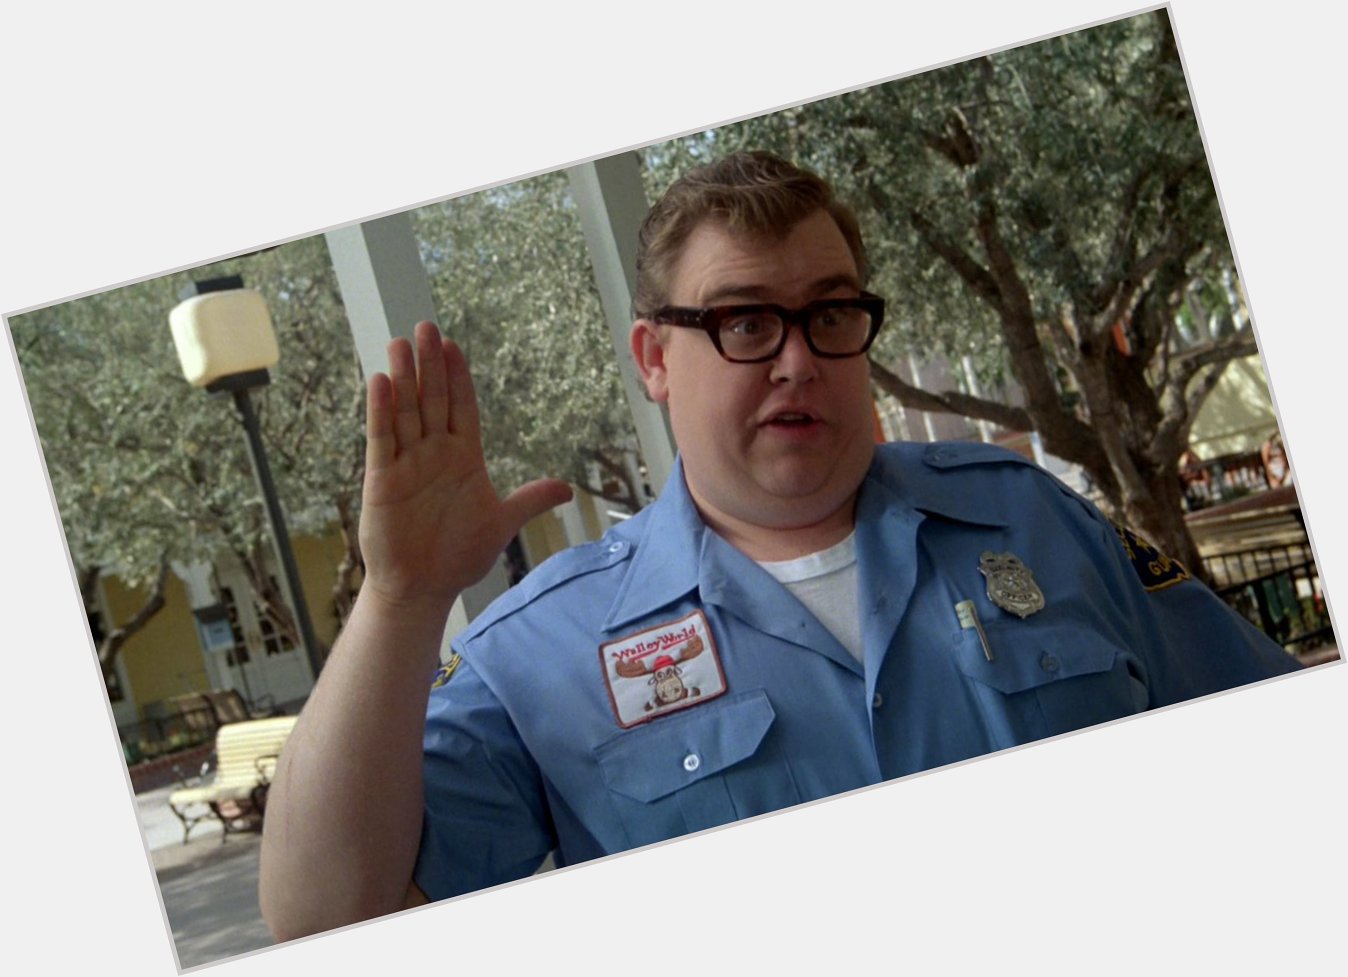 Happy birthday to the late, great John Candy. He should have turned 65 today.  We got robbed early of a great one. 